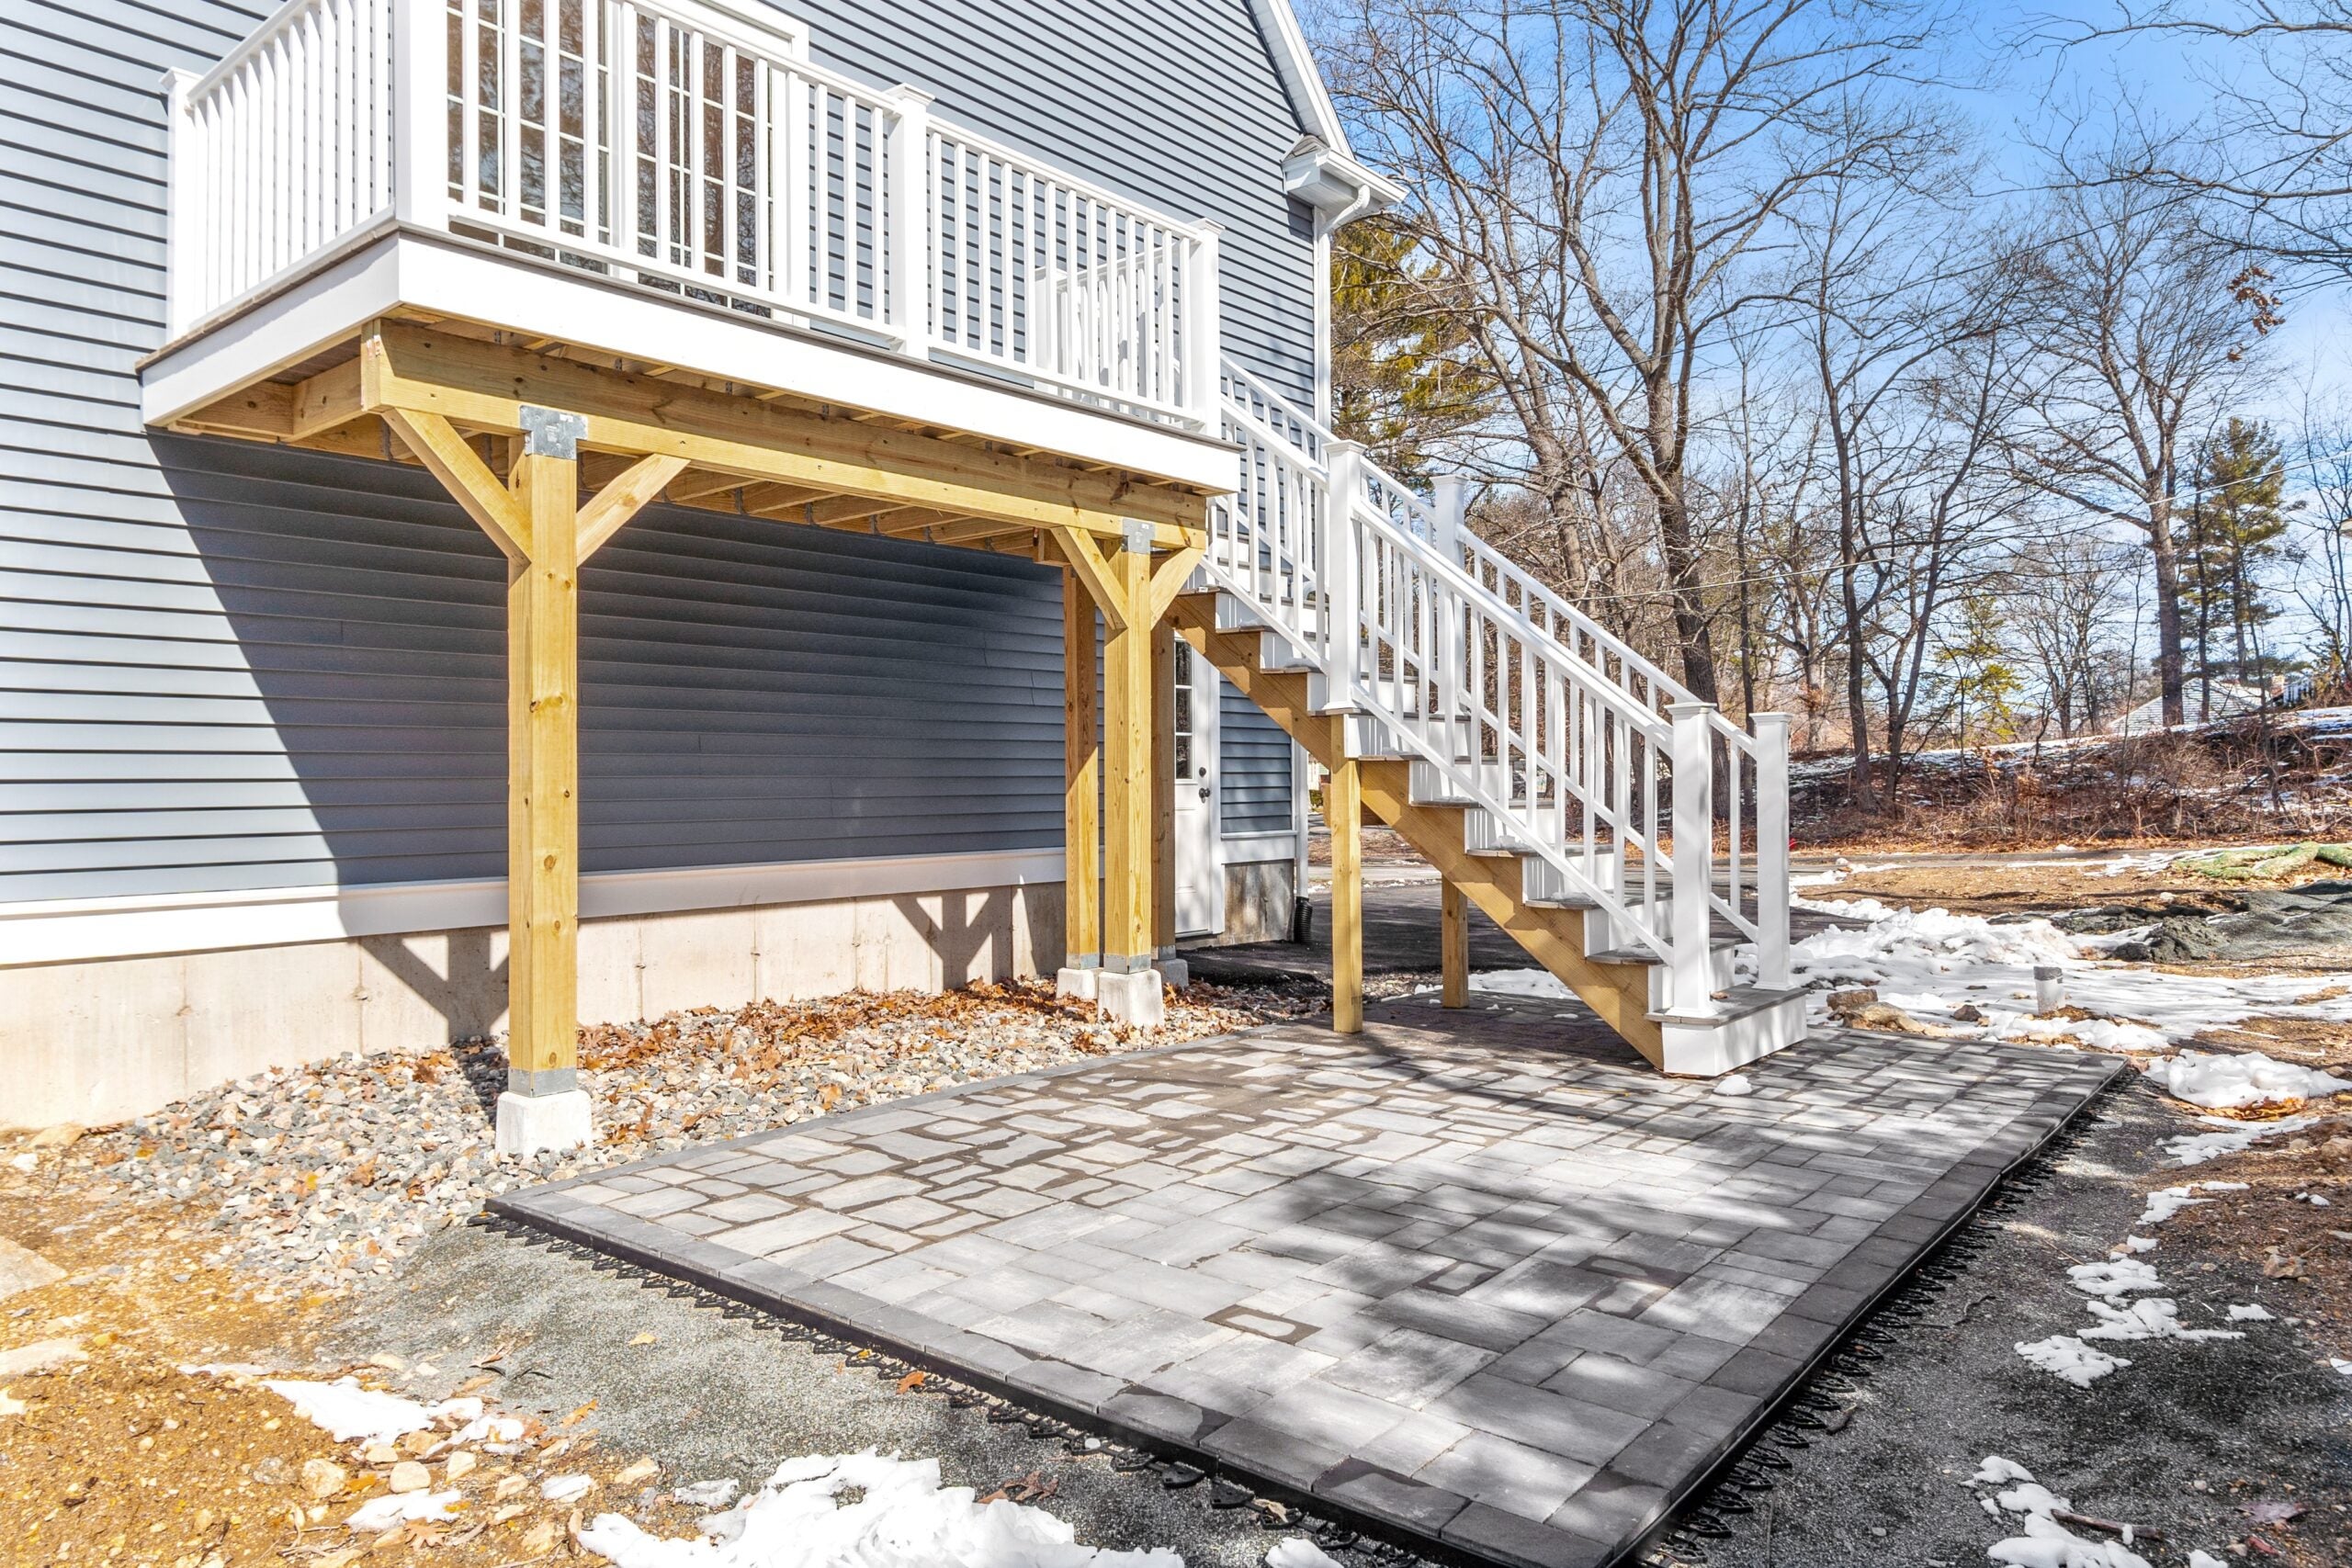 A view of a deick with white railings and a gray paver patio.